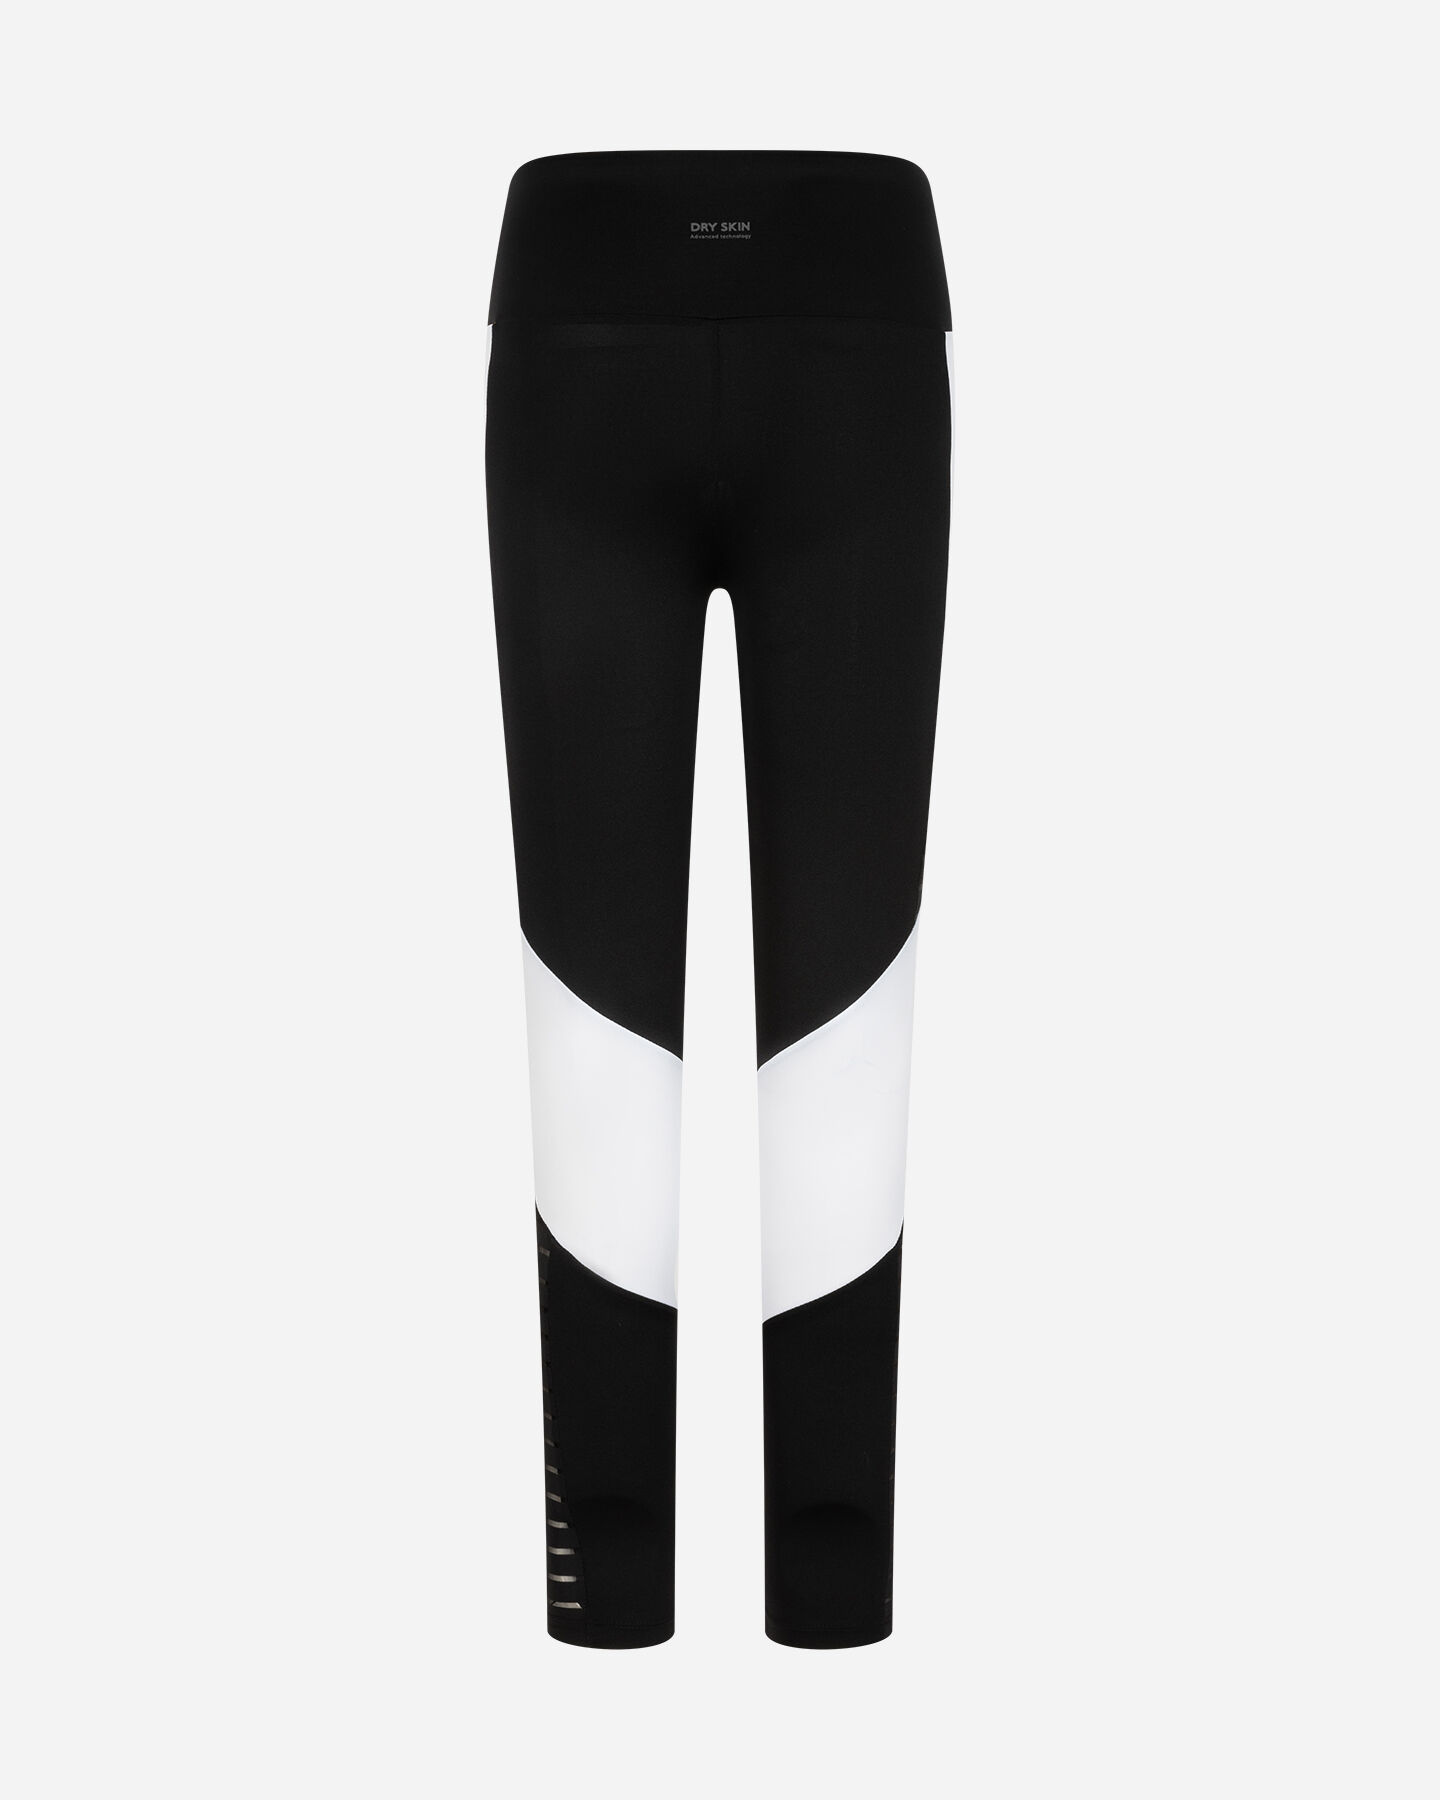  Leggings ARENA PUSH UP W S4131149|050/001|XS scatto 5